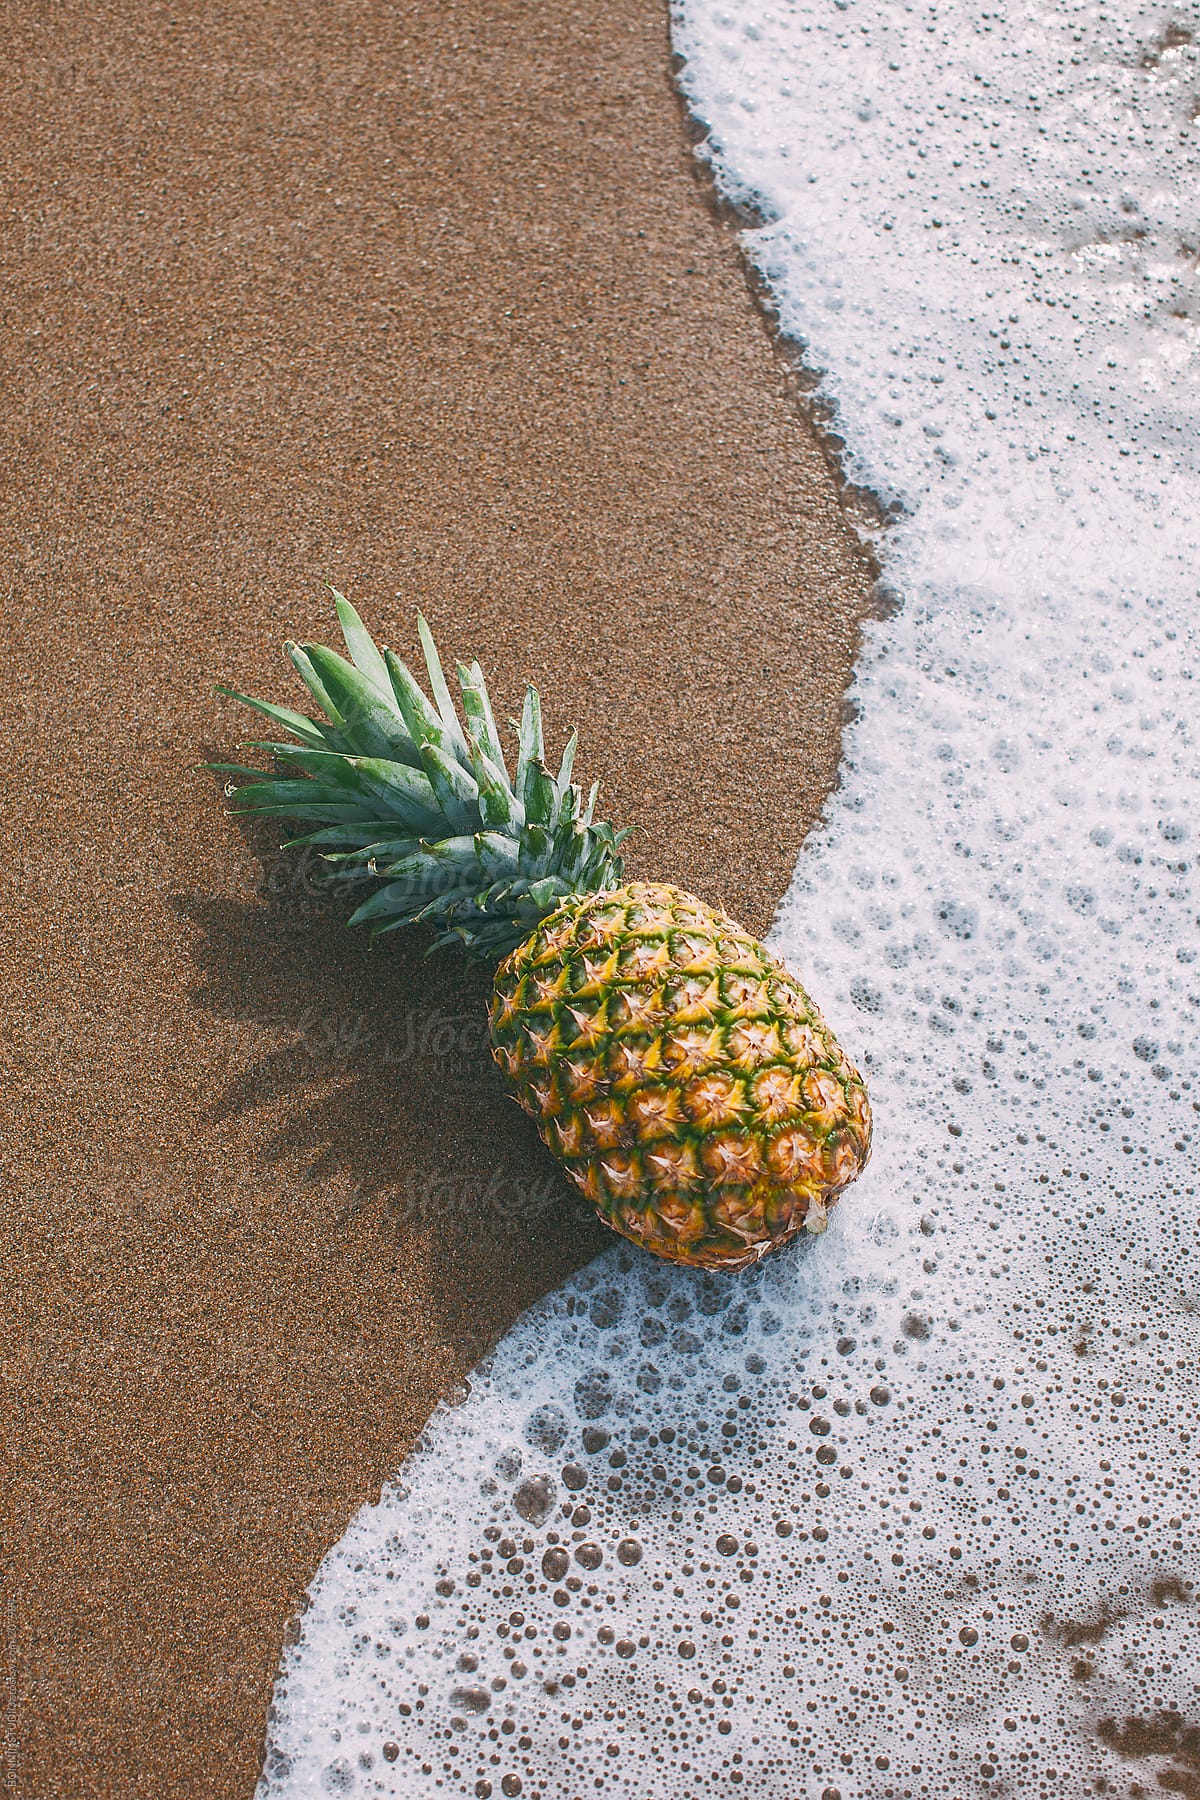 Pineapple on the beach. Summer time. by BONNINSTUDIO - Stocksy United